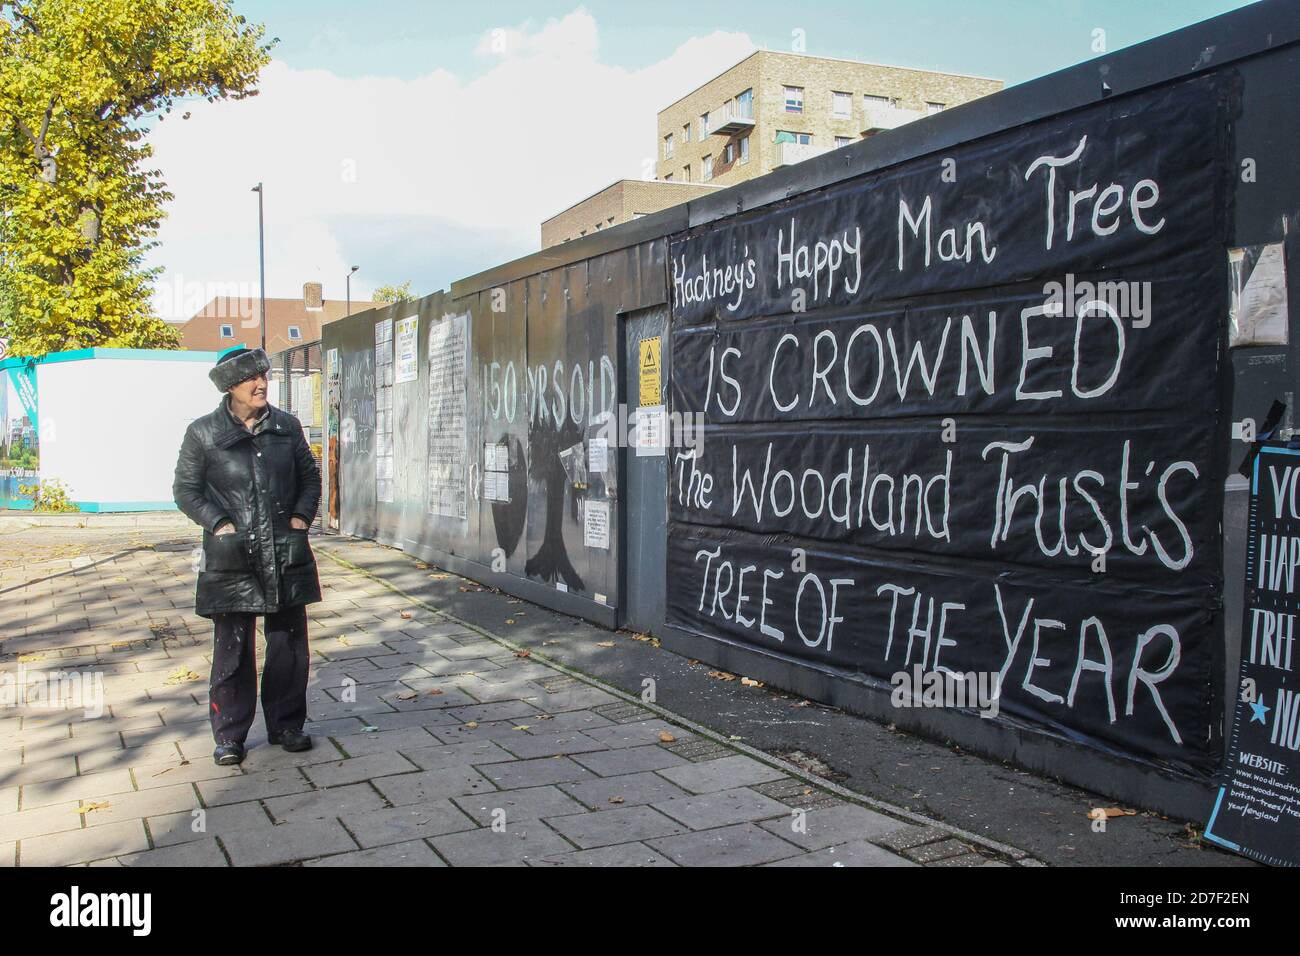 London, United Kingdom, 22th of Oct. 2020. Veteran peace campaigner Maria Gallastegui, updates the graffitti regarding The Happy Man Tree, in London’s Hackney. This 150-year-old tree, part of London Heritage, has been awarded this year's Woodland Trust Tree of the Year on 22nd of October. But it could be felled within a few weeks, due to the controversial Berkeley Homes development plans for Hackney's council housing plans.  The Council argues that ‘ Stock Photo